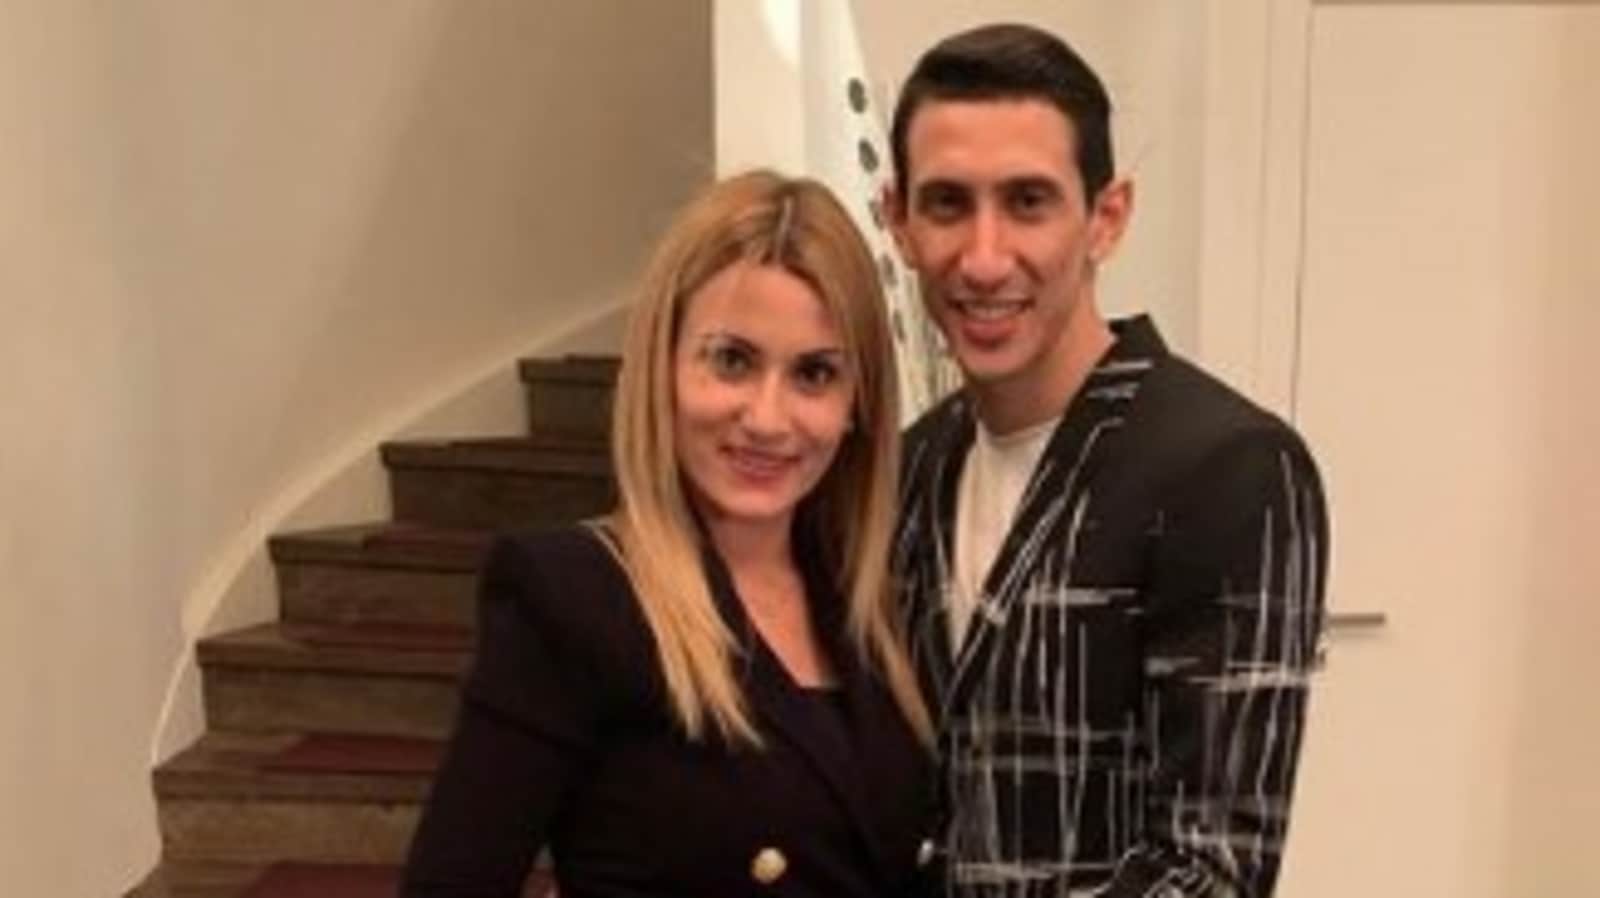 the-women-are-plastic-angel-di-maria-s-wife-describes-horrible-manchester-united-life